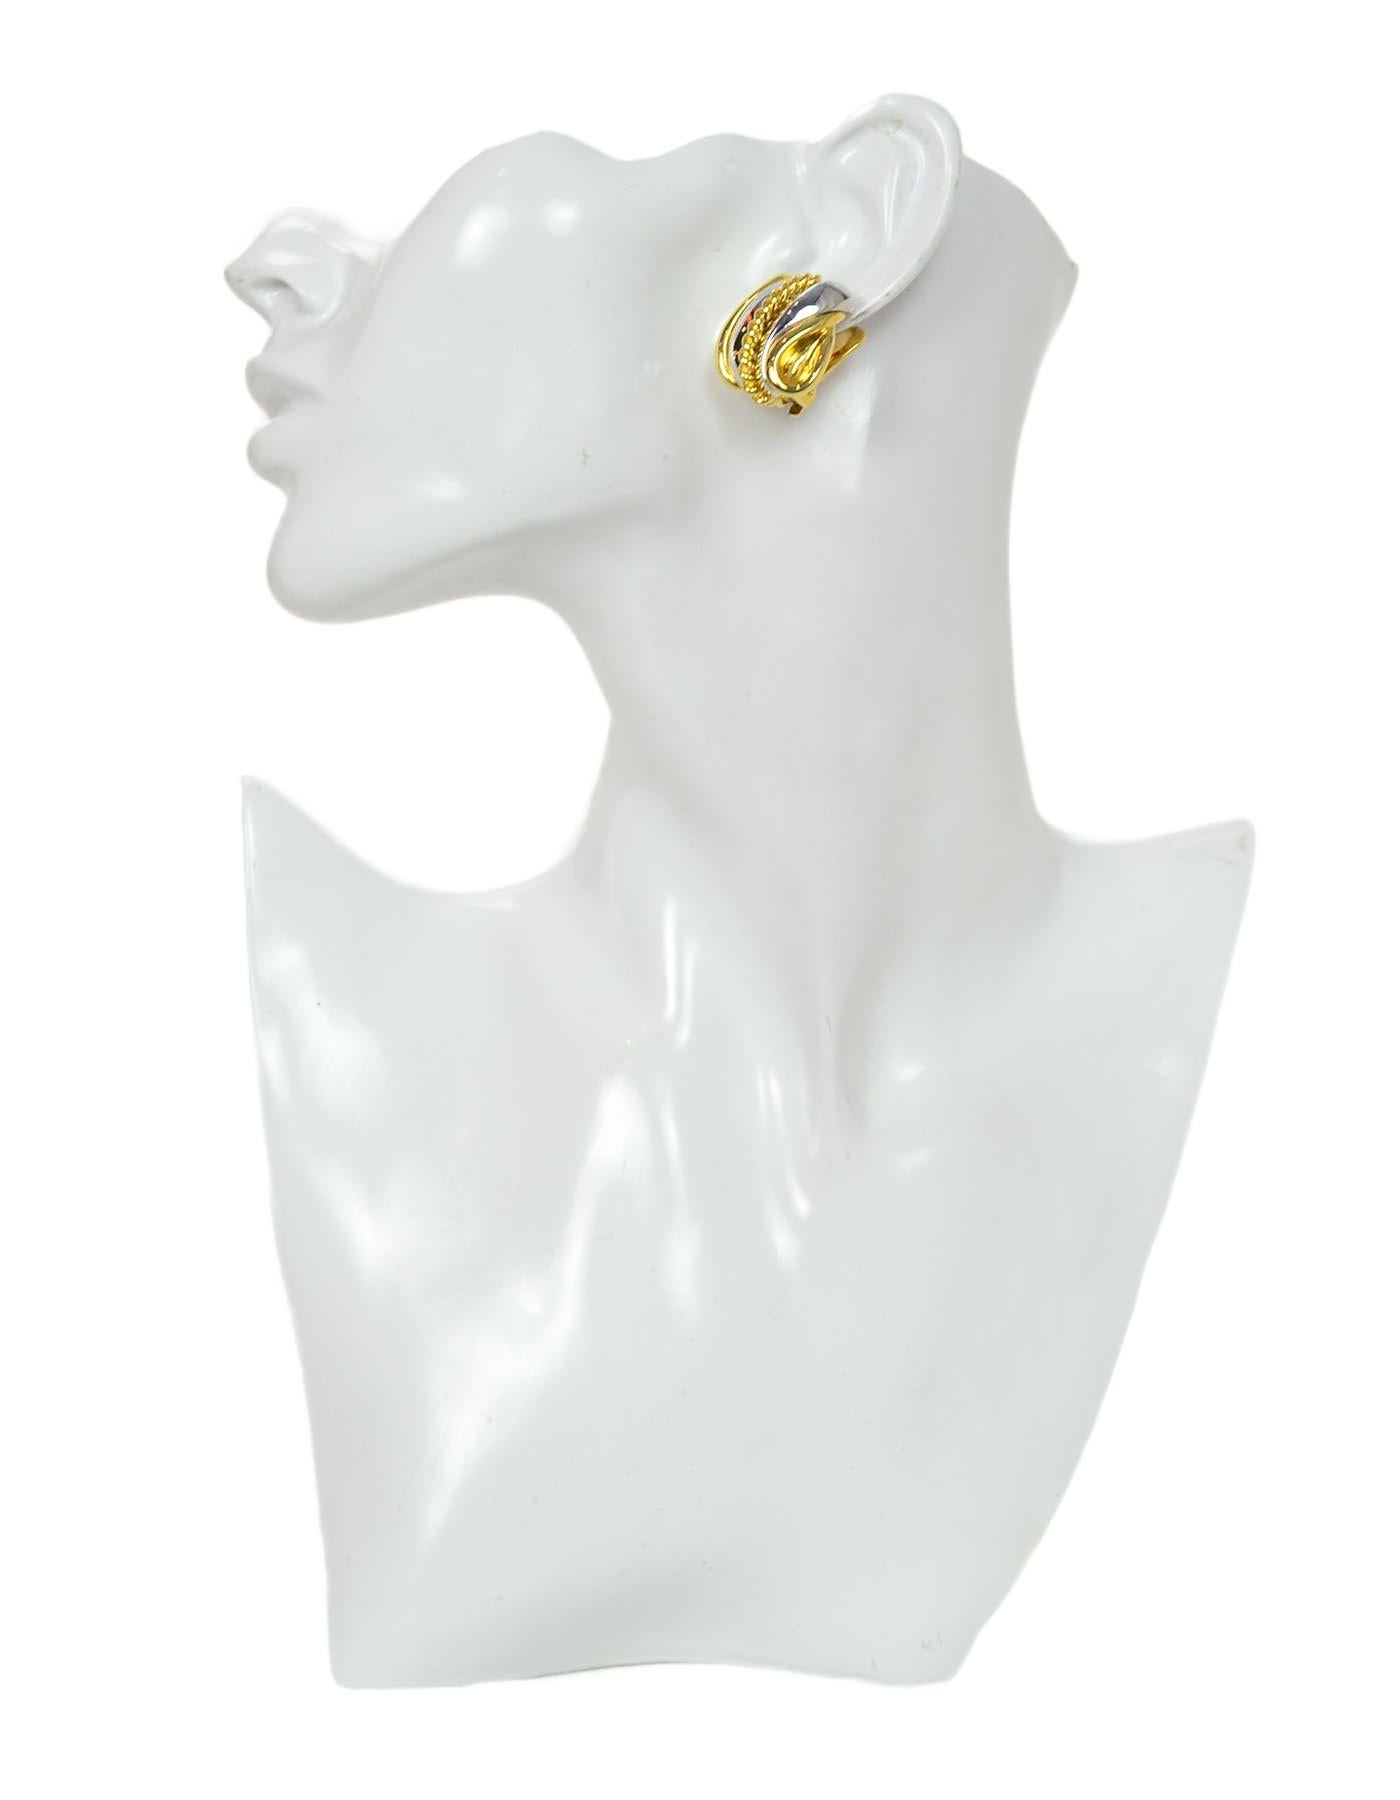 Nolan Miller Gold/Silver Metal Clip-On Earrings

Color: Gold, silver
Materials:  Metal
Hallmarks:  On back- 